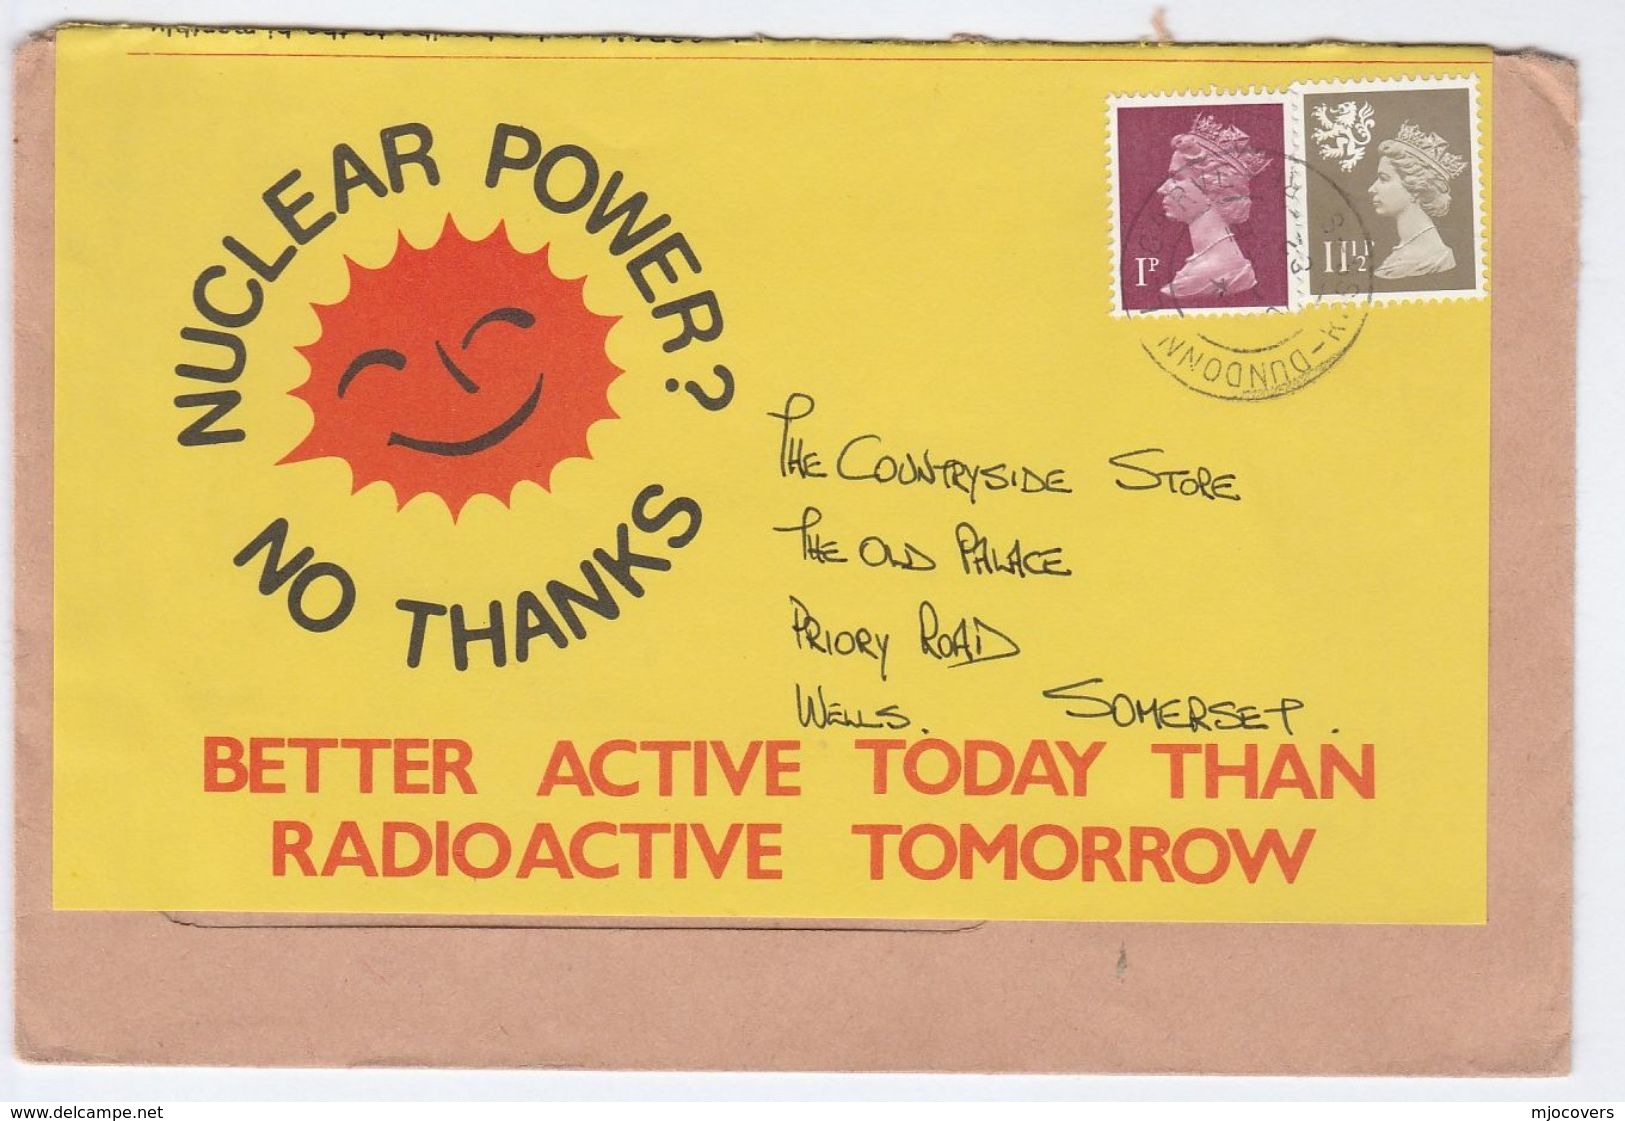 1982 Dundonnell NUCLEAR POWER NO THANKS COVER Re-use Label BETTER ACTIVE TODAY THAN RADIOACTIVE Atomic Energy Gb Stamps - Atom